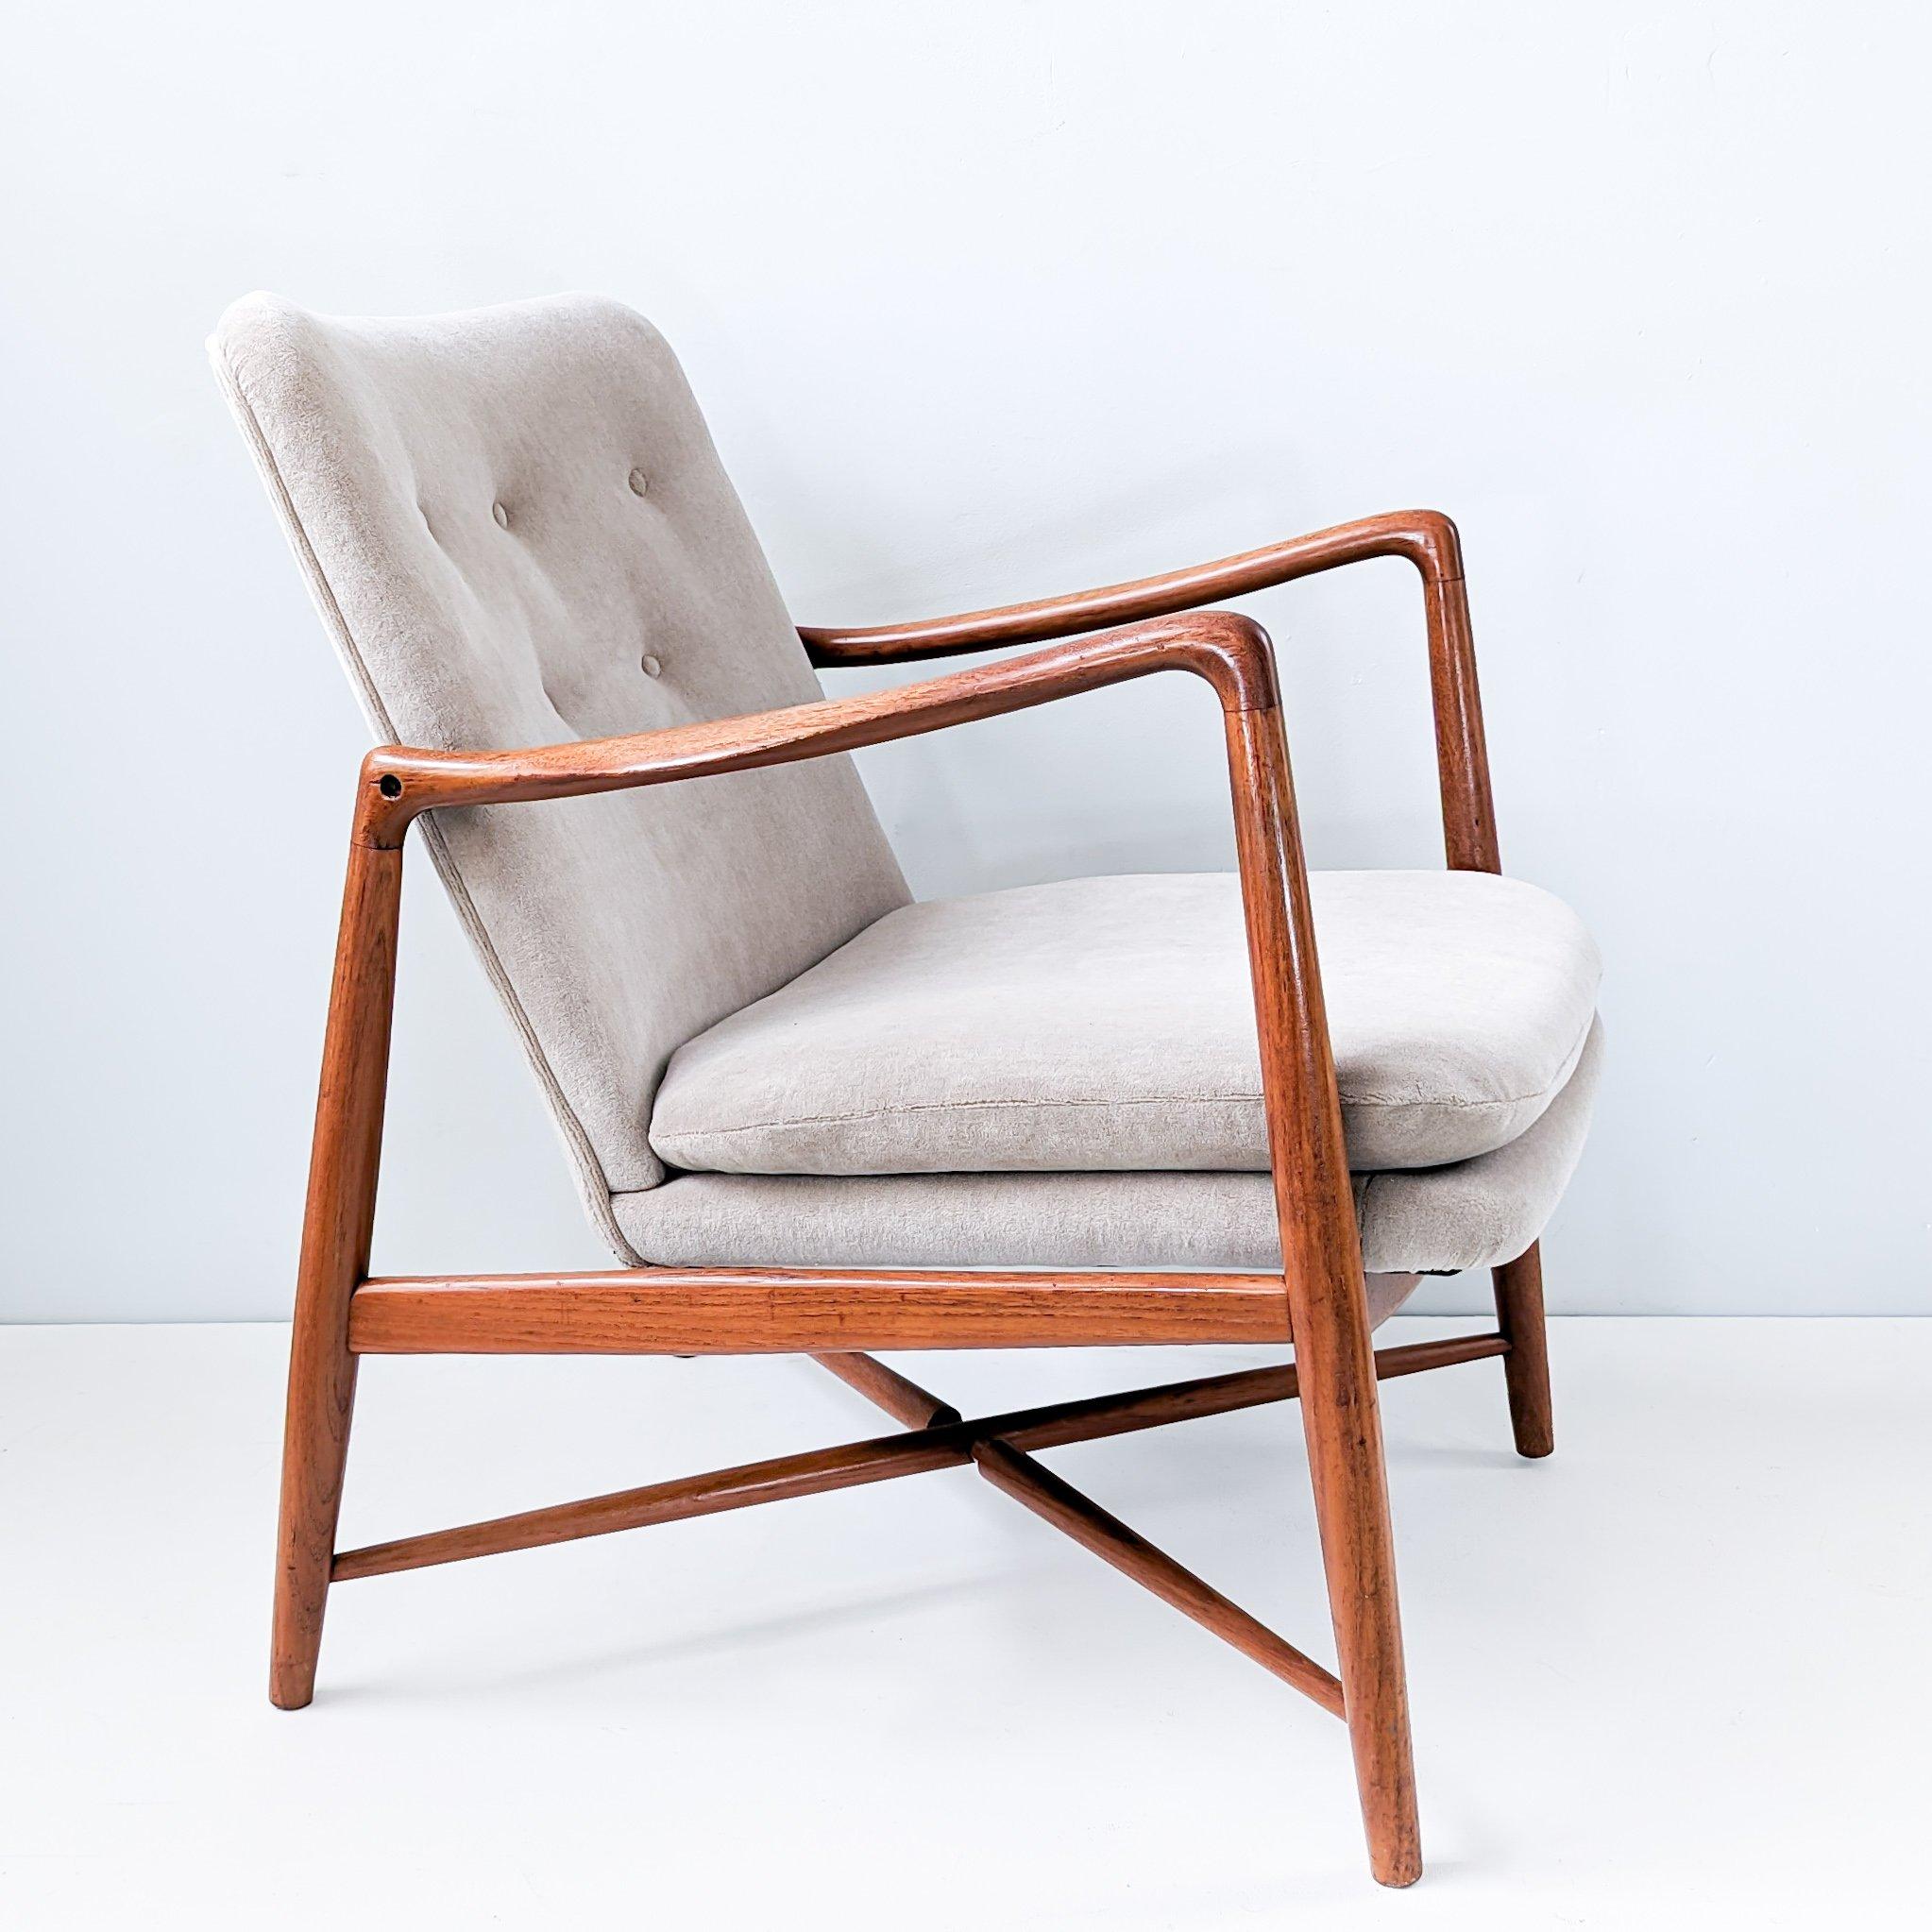  Designed by Finn Juhl and manufactured by Bovirke, this chair embodies Juhl's distinctive style—simple yet intricately detailed.

The wood maintains its good original condition, with a beautiful patina that enhances its overall allure. The fabric